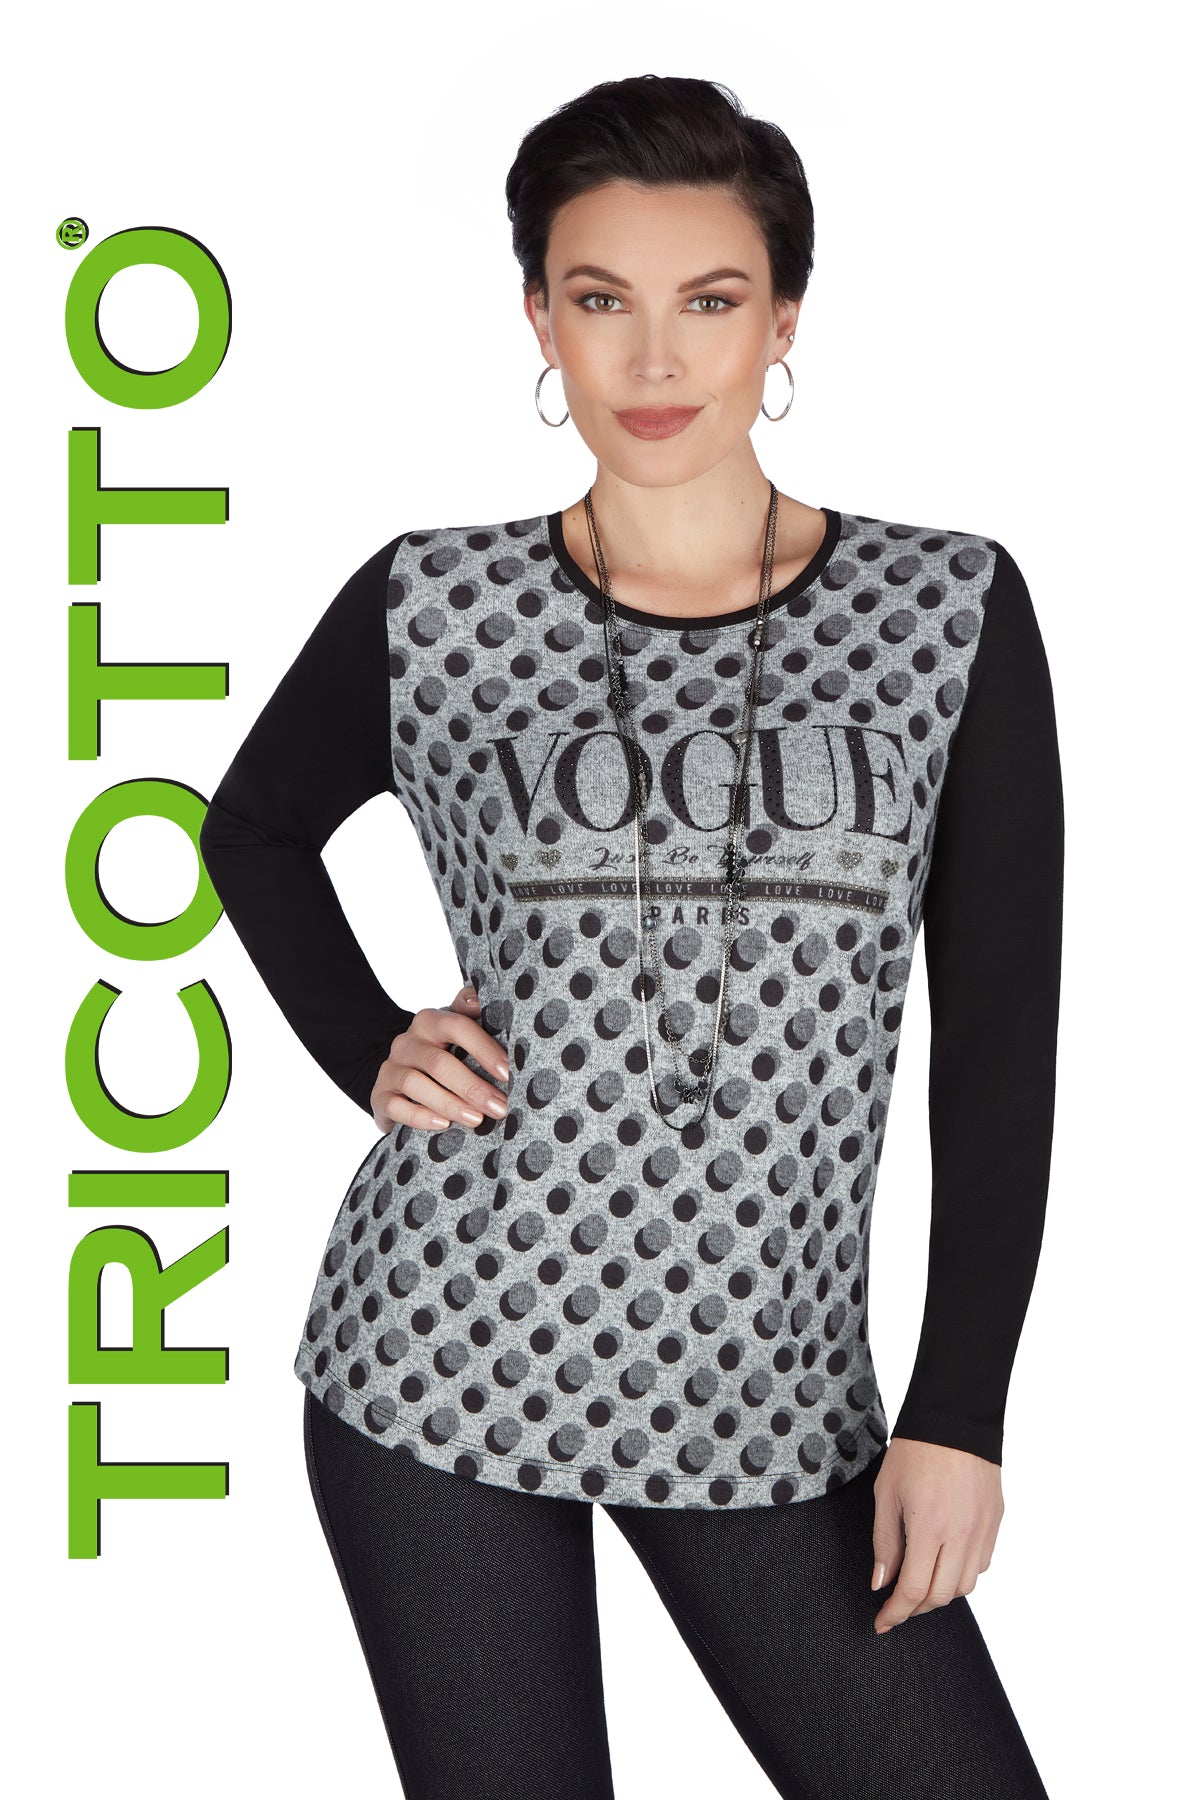 Tricotto Sweaters Online-Tricotto Sweaters-Buy Tricotto Sweaters Online-Tricotto Fashion Quebec-Tricotto Online Shop